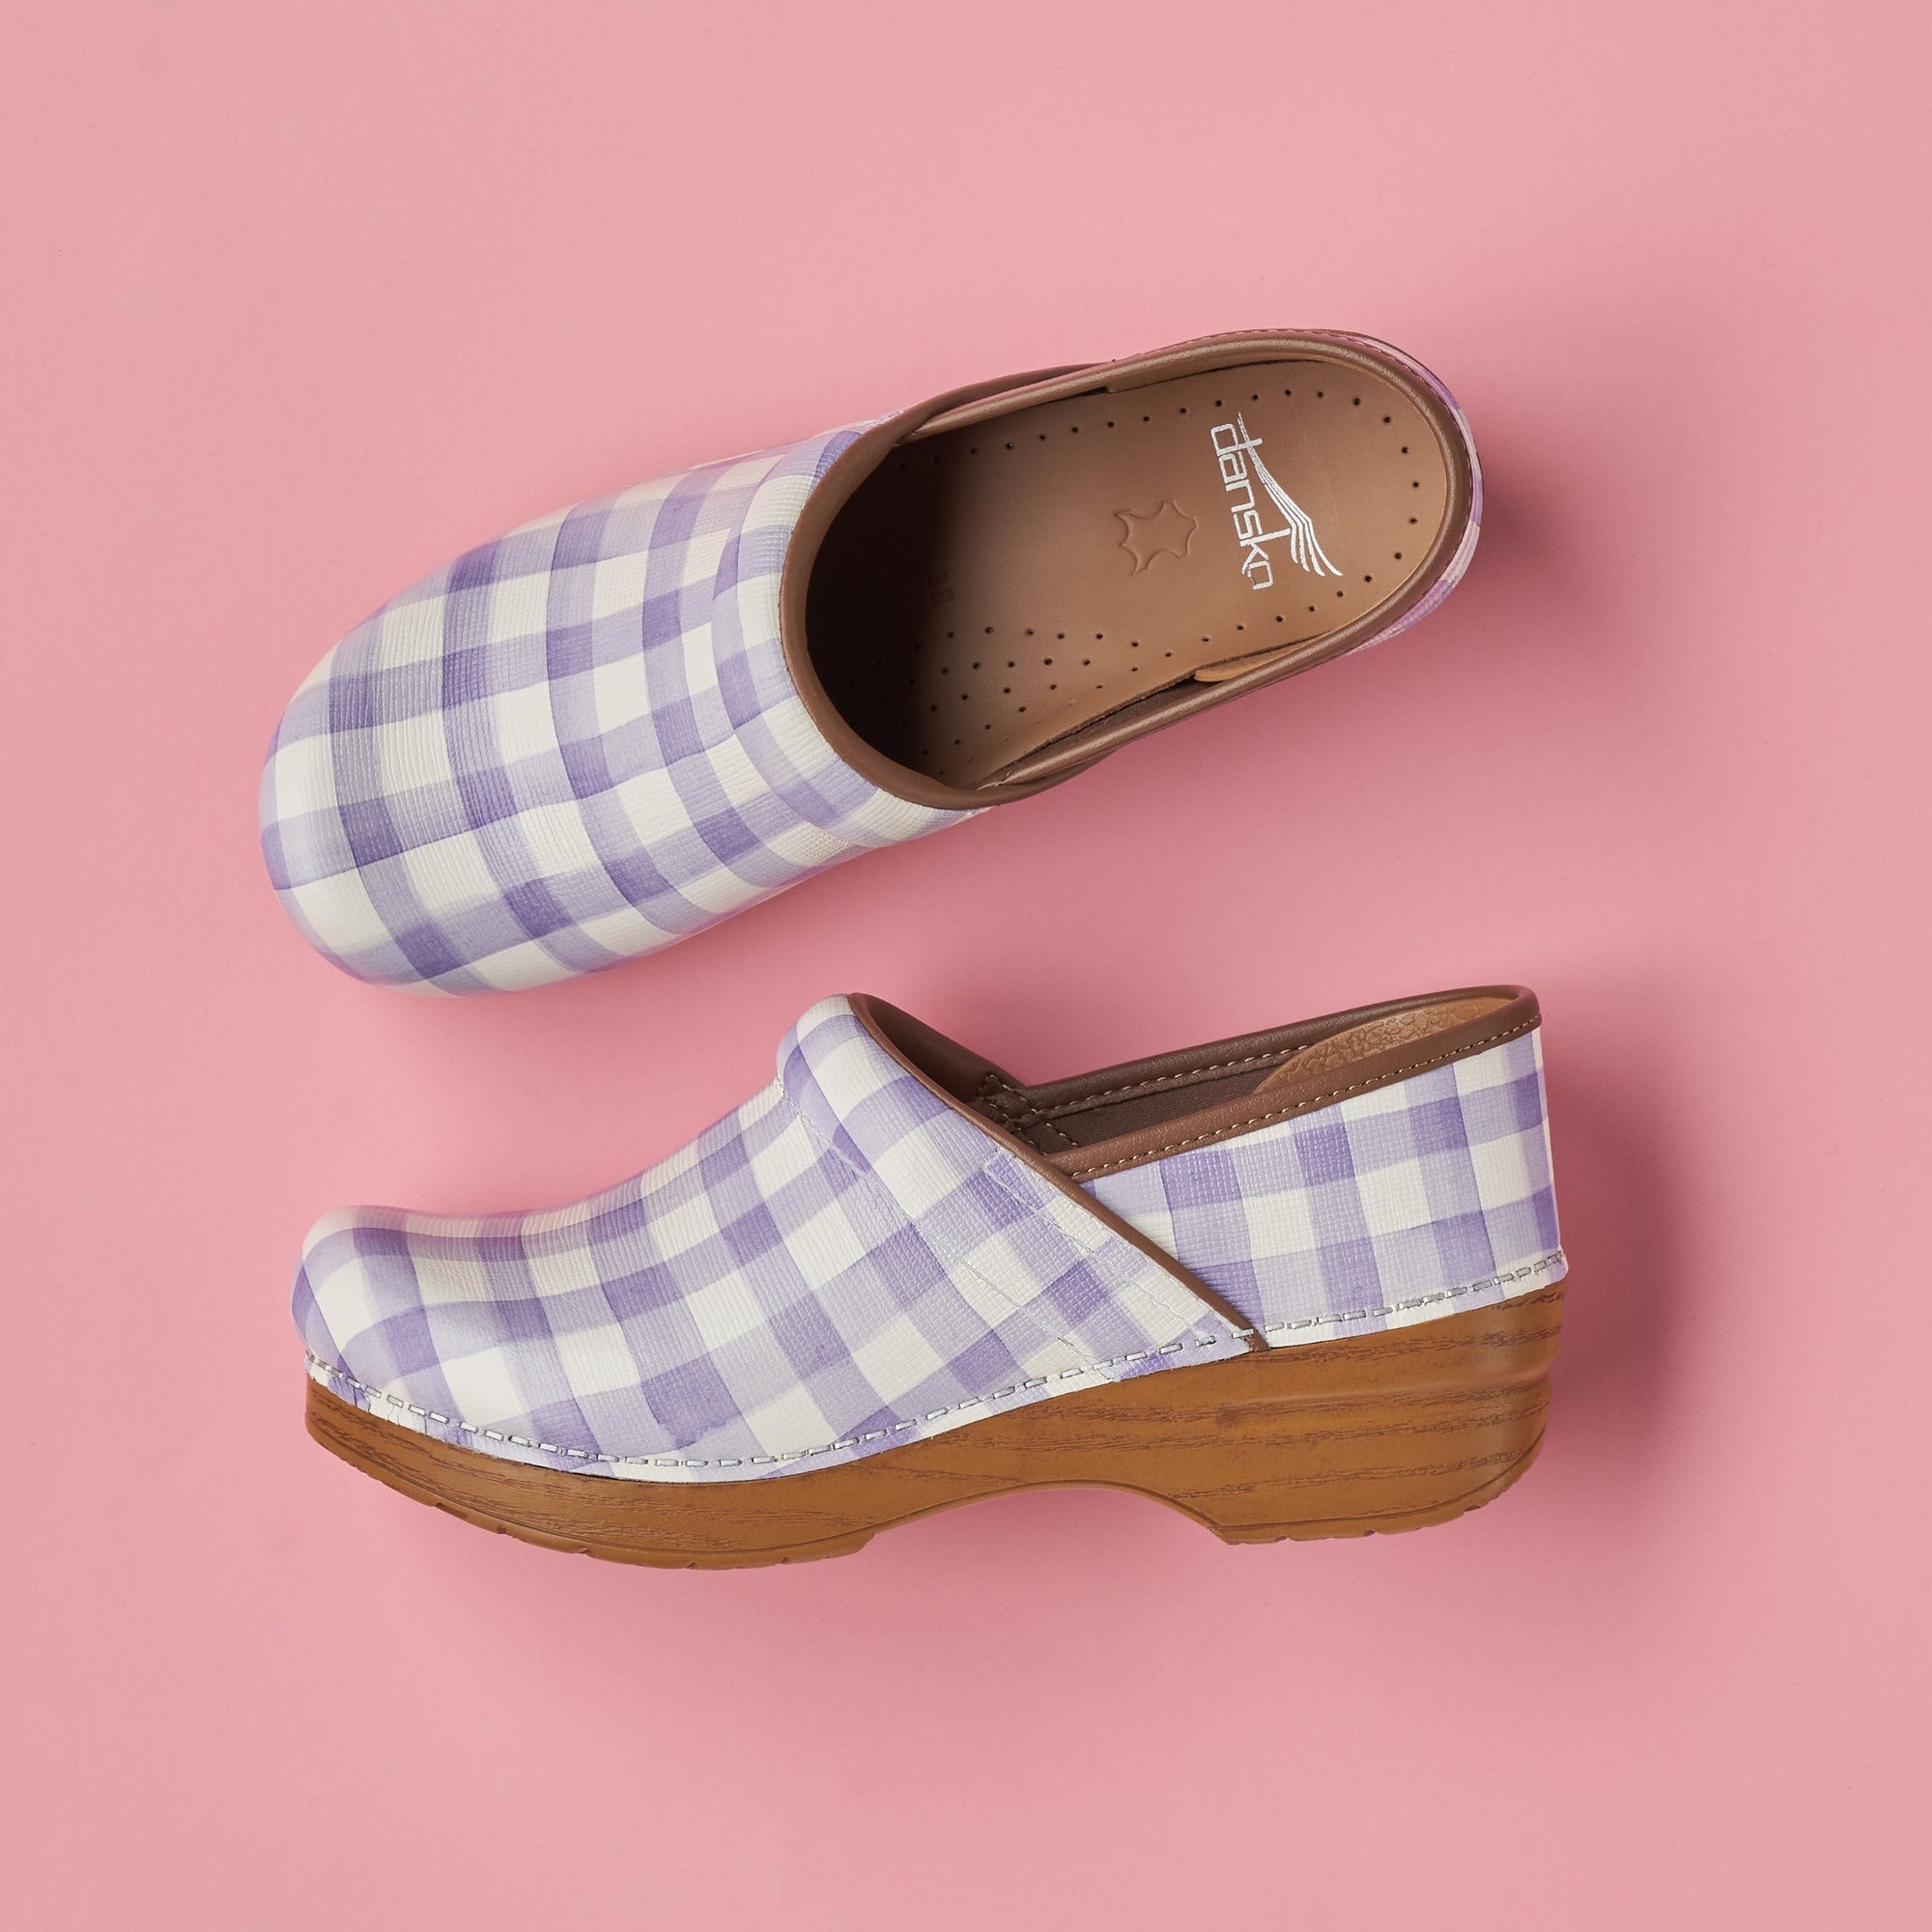 A closeup look at the lavender plaid clogs, including a look at the standard Dansko footbed.